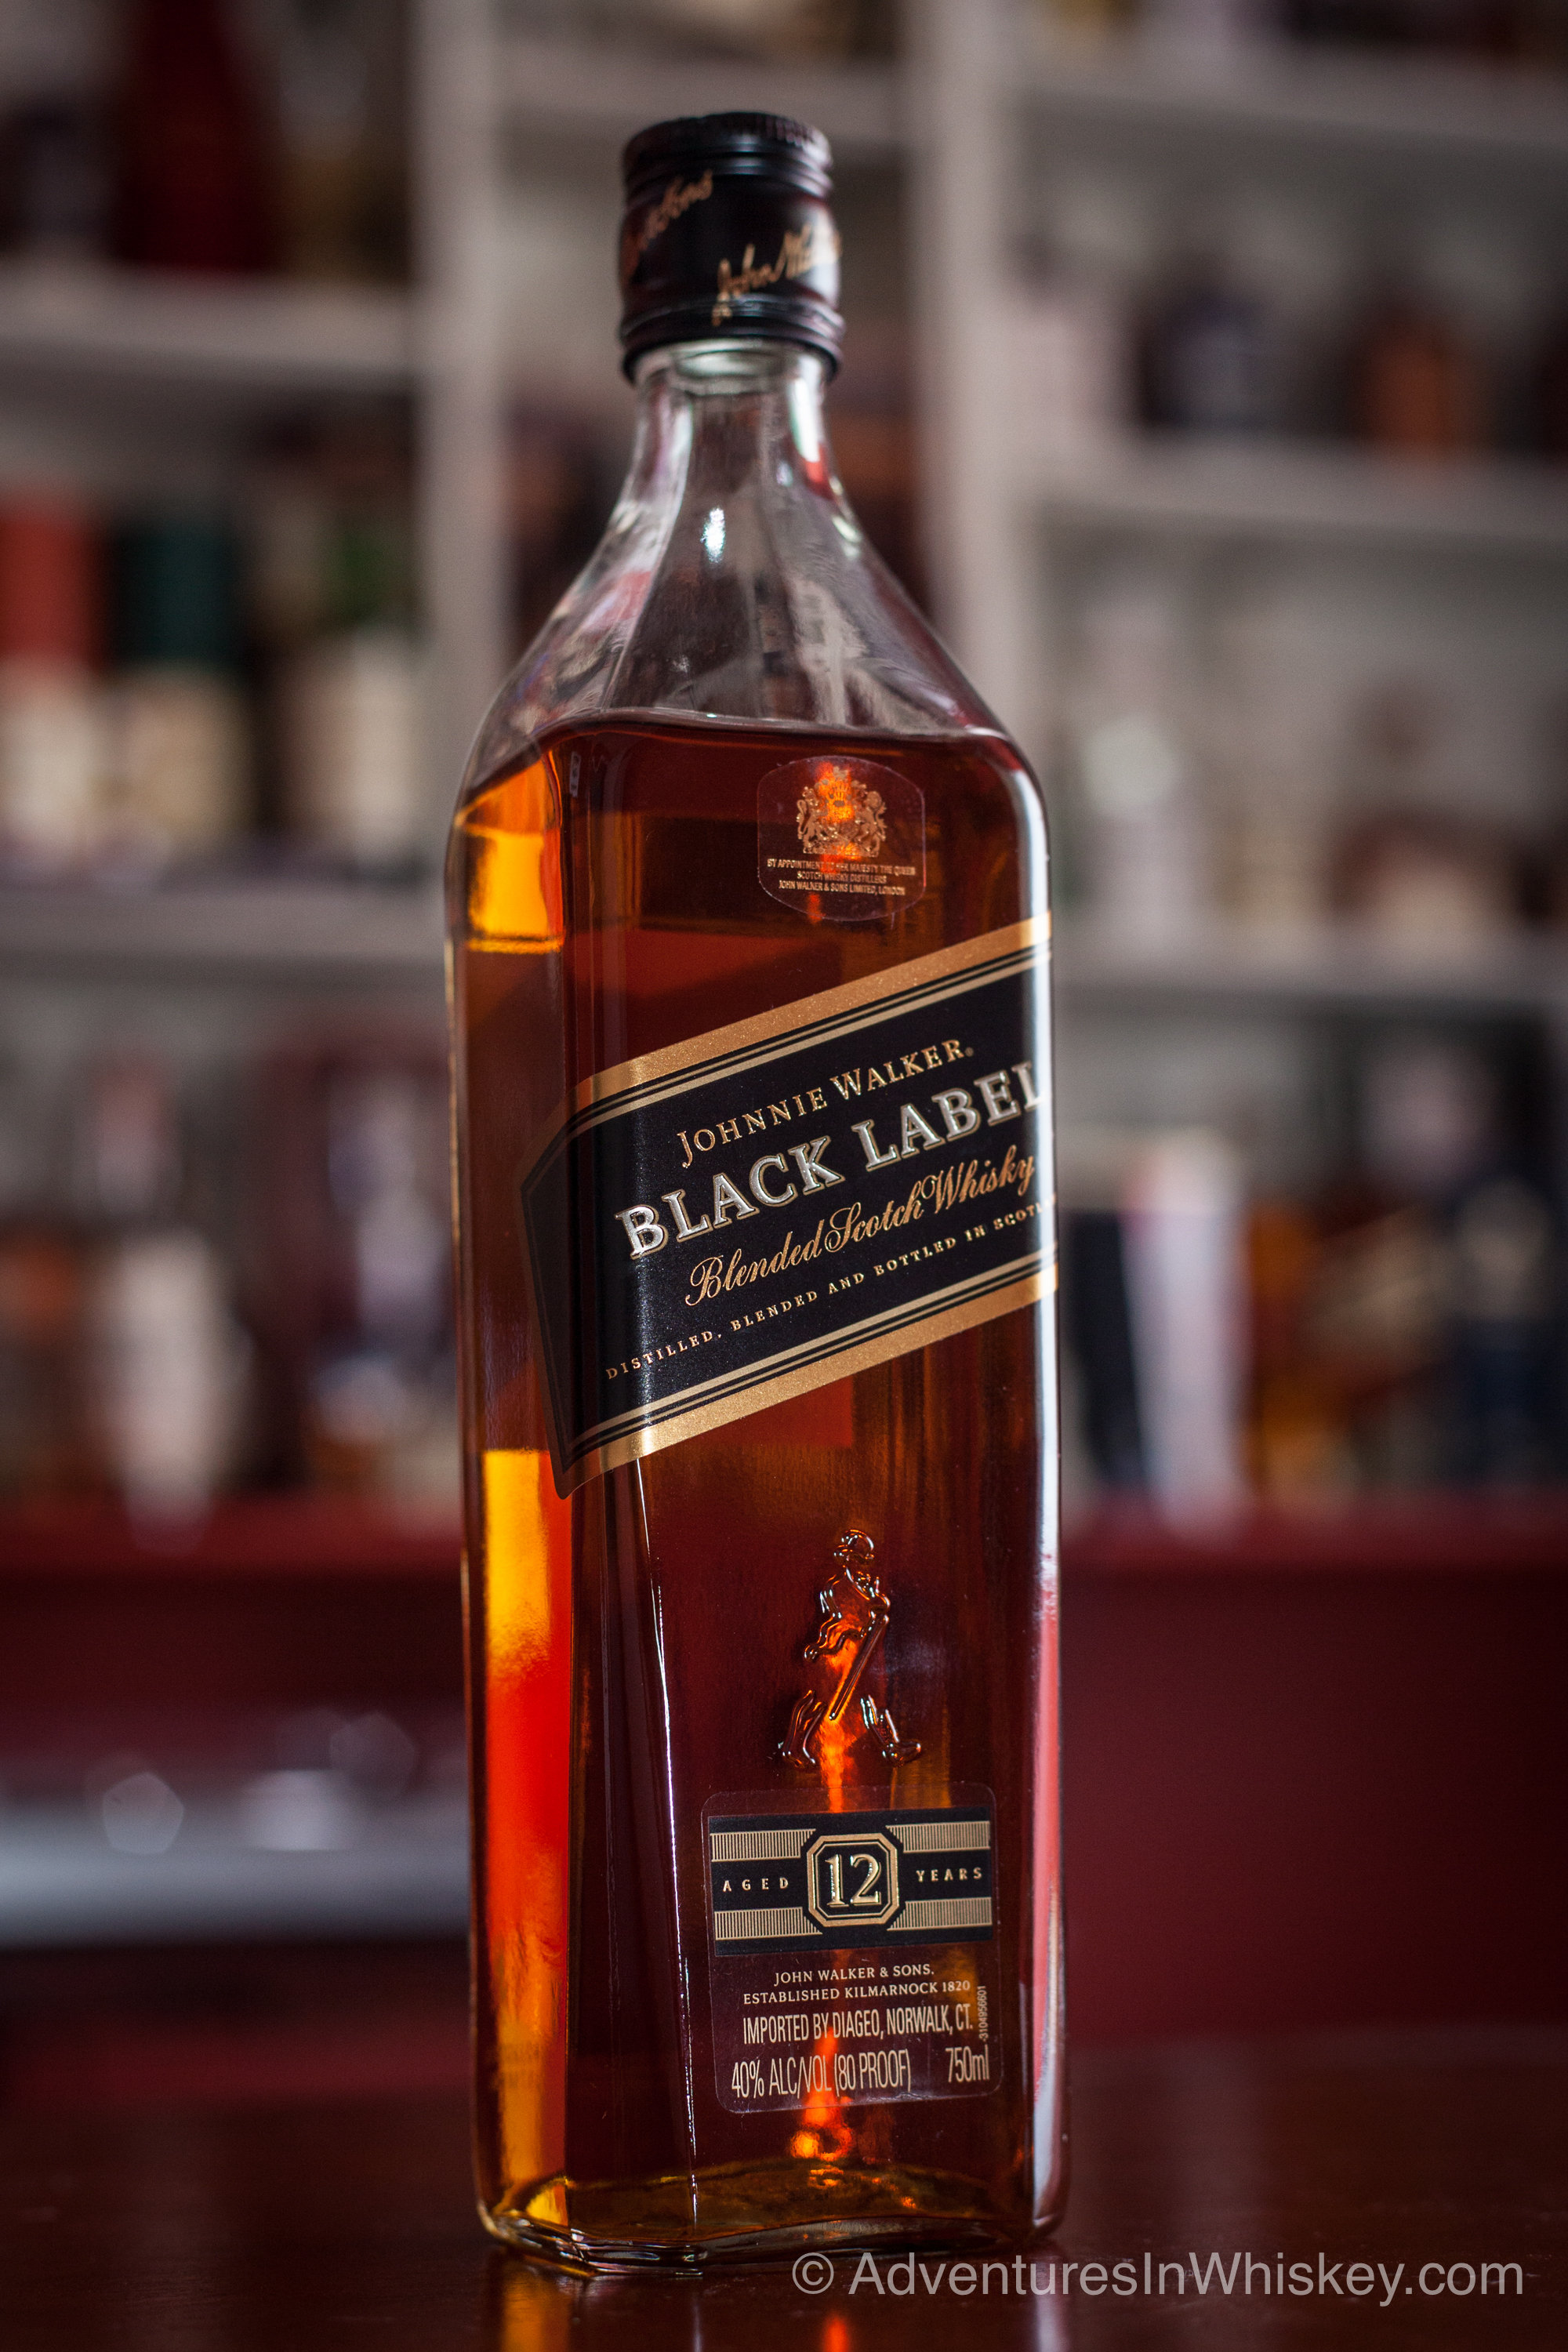 Johnnie Walker Black Label Scotch Whisky Review | Adventures In Whiskey